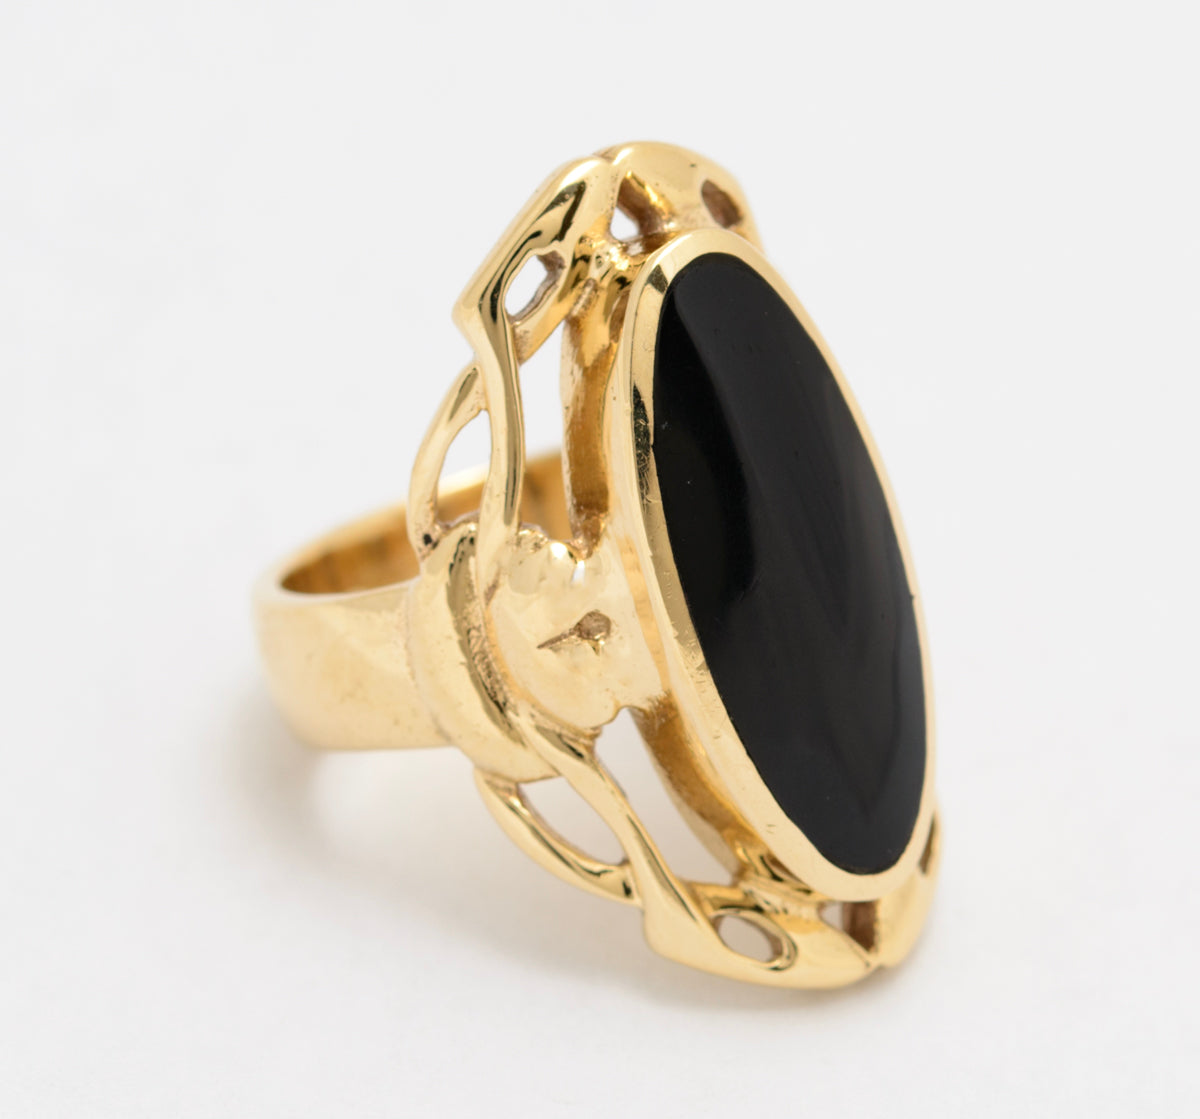 Whitby Jet 9ct Gold Chunky Stylish Gothic Ring by C W Sellors UK Size L - Boxed (A1649)